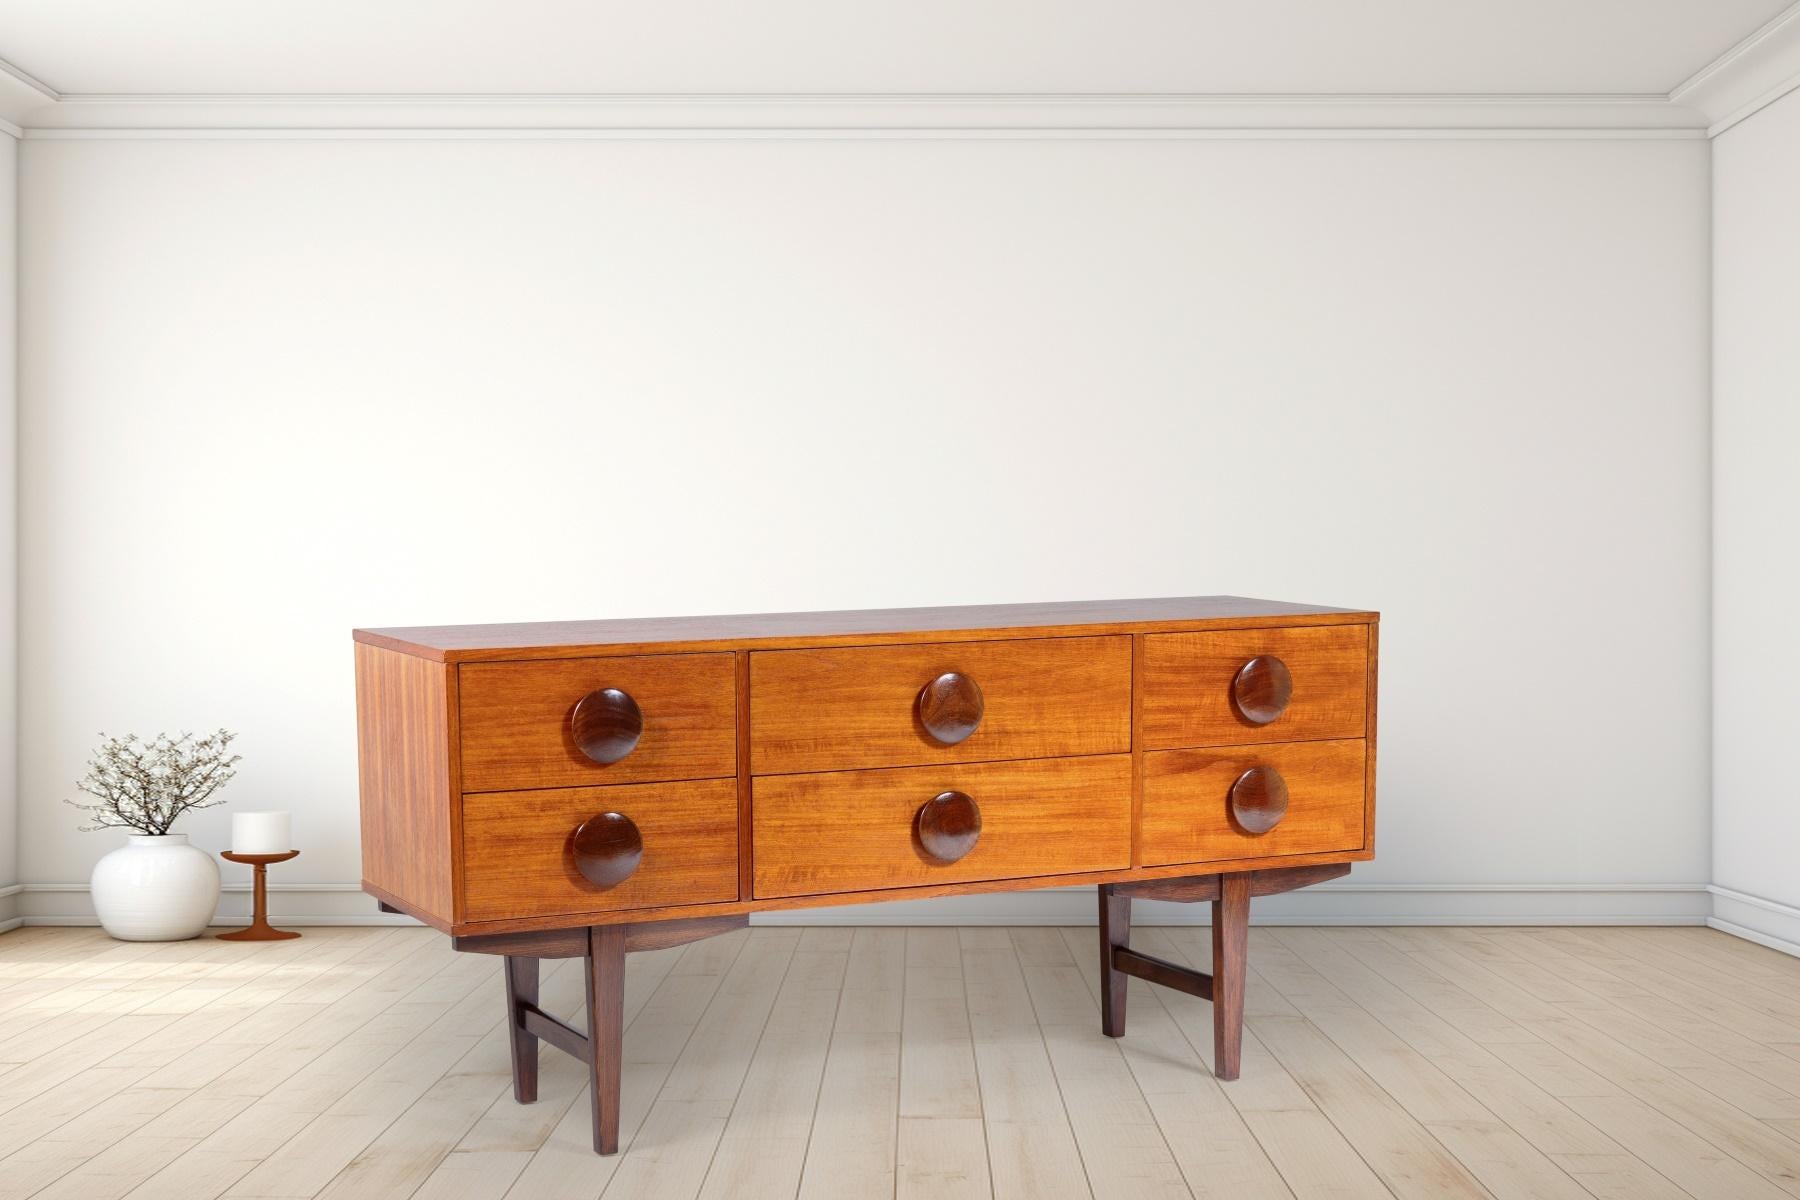 A small but stylish 1960s mid century sideboard, has a great look with central pair of wide drawers flanked by narrower drawers, drawer fronts feature large solid teak wood button handles in a contrasting tone which really gives the piece its